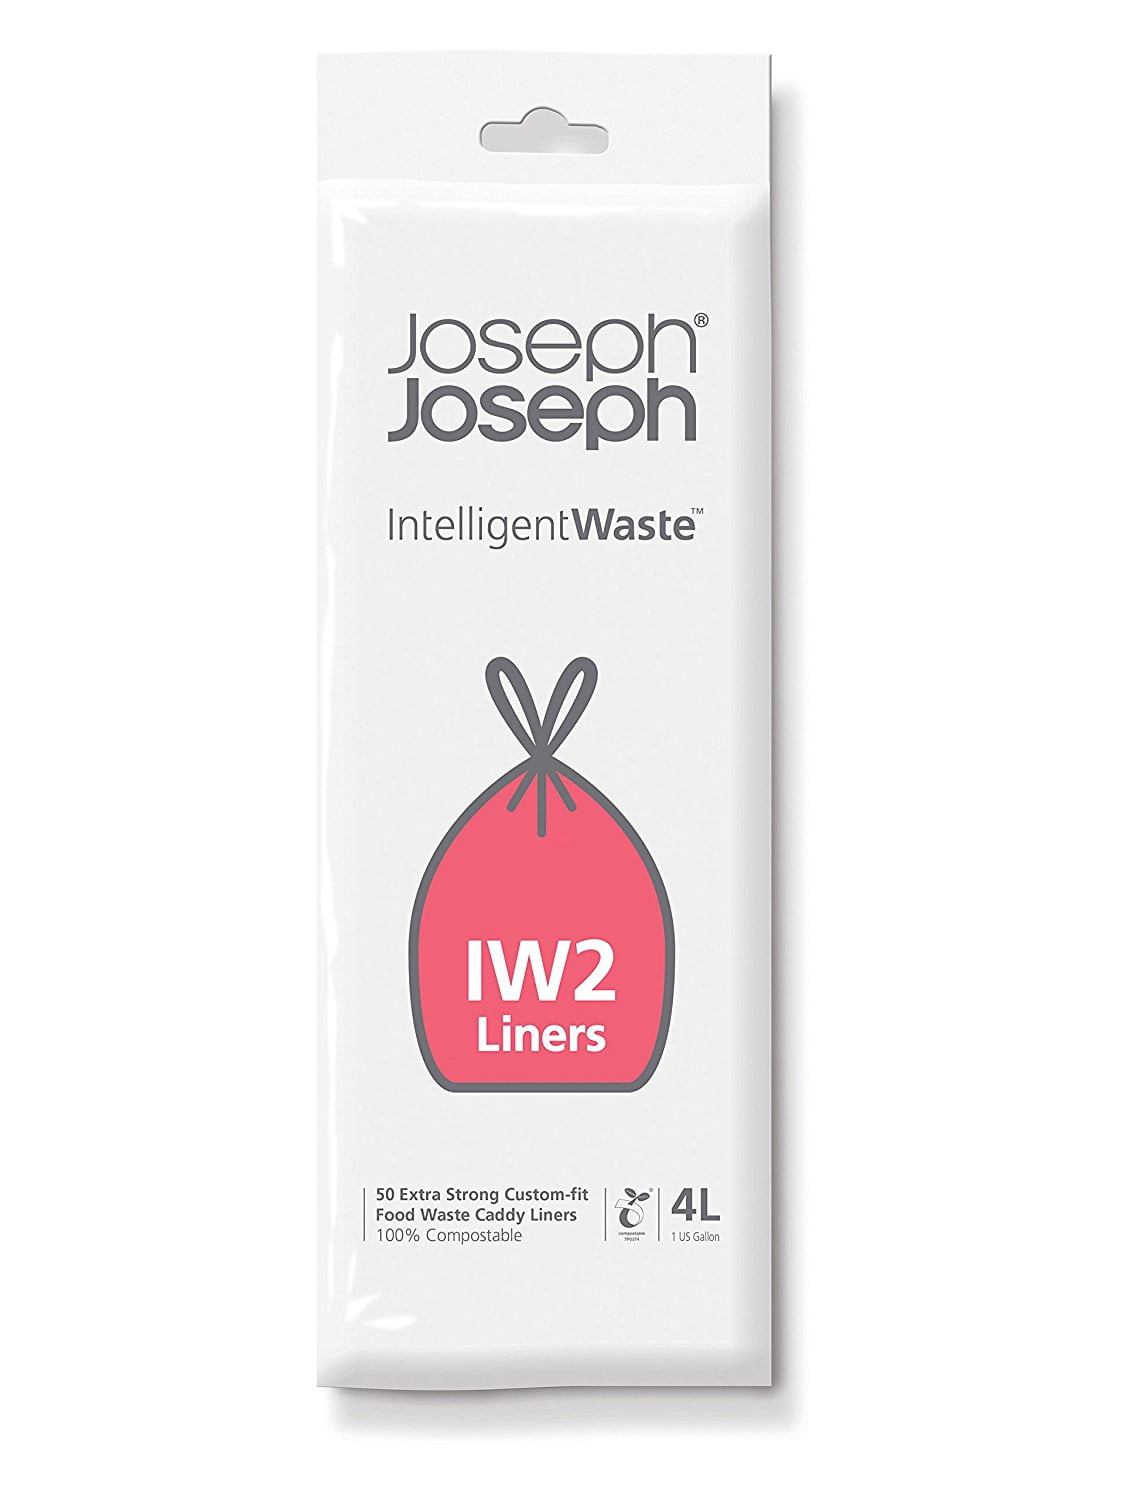 Waste Liners, Compostable Bags and Replacement Filters Joseph Joseph Intelligent Waste Accessories Bundle 